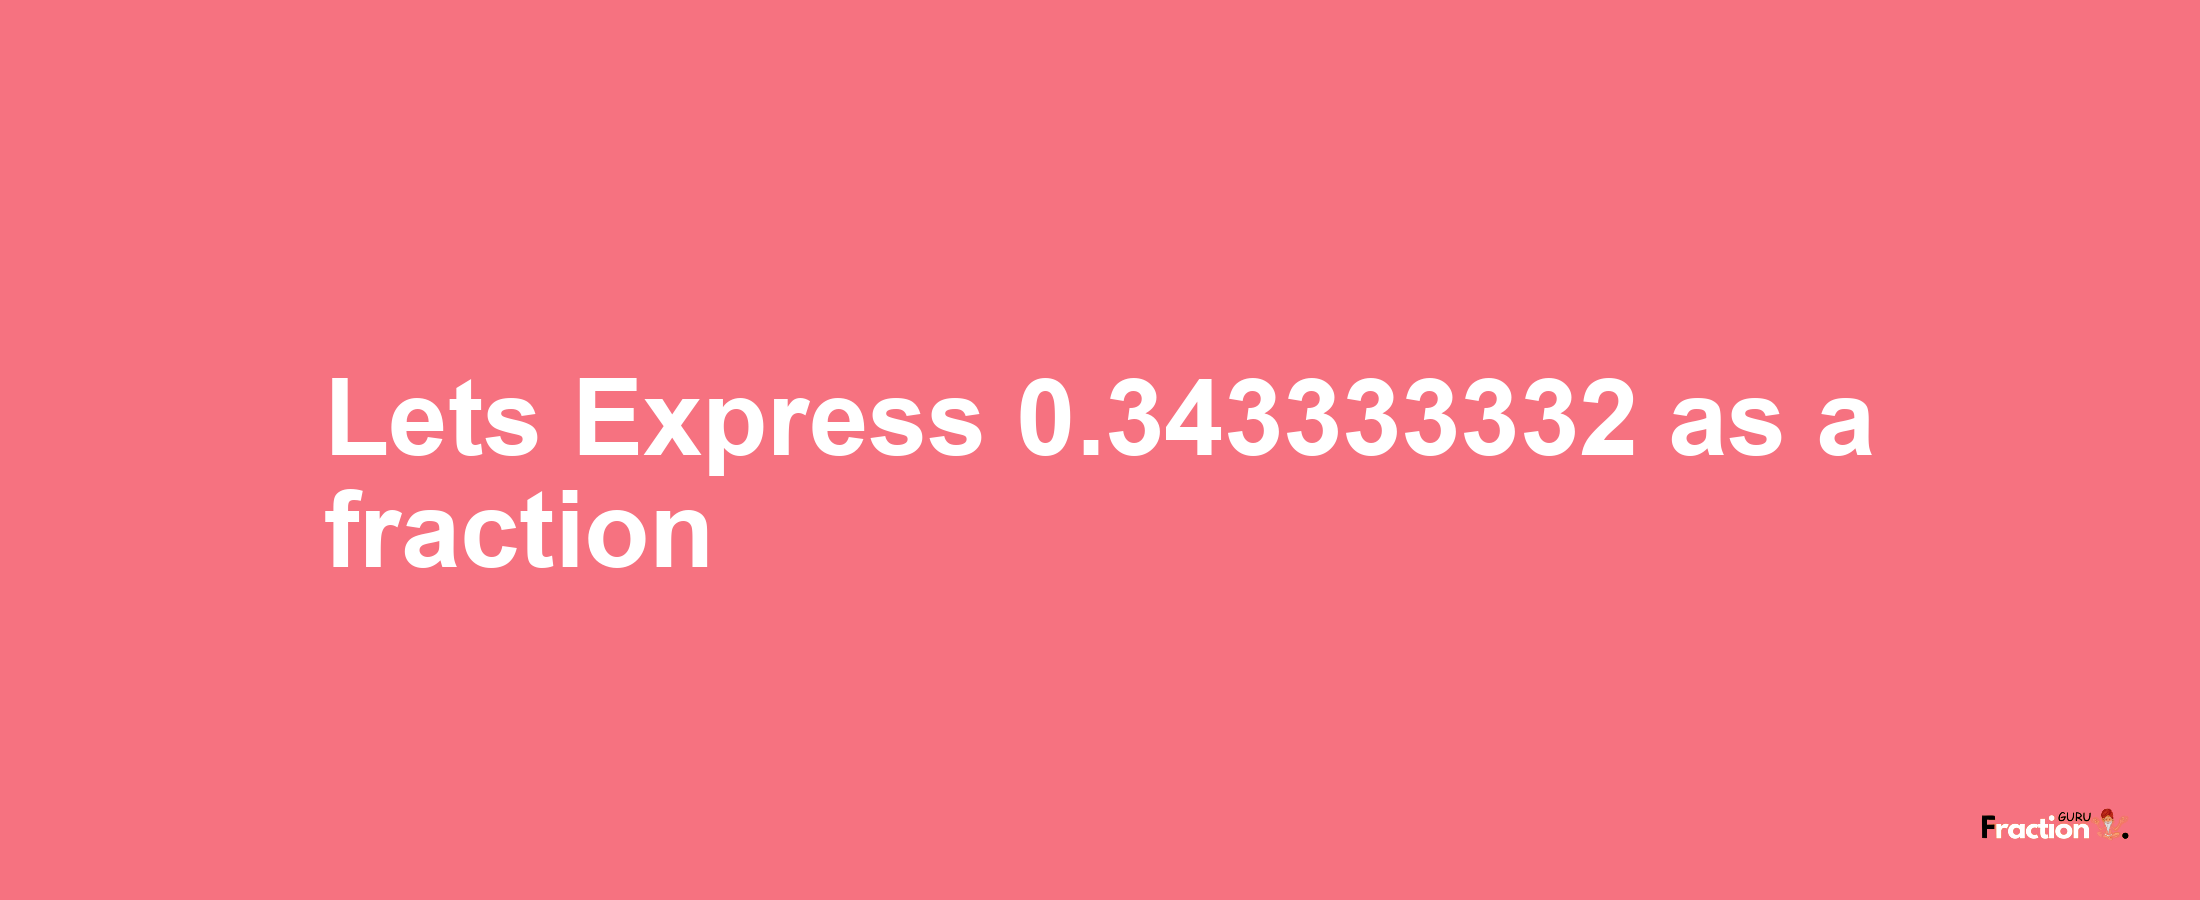 Lets Express 0.343333332 as afraction